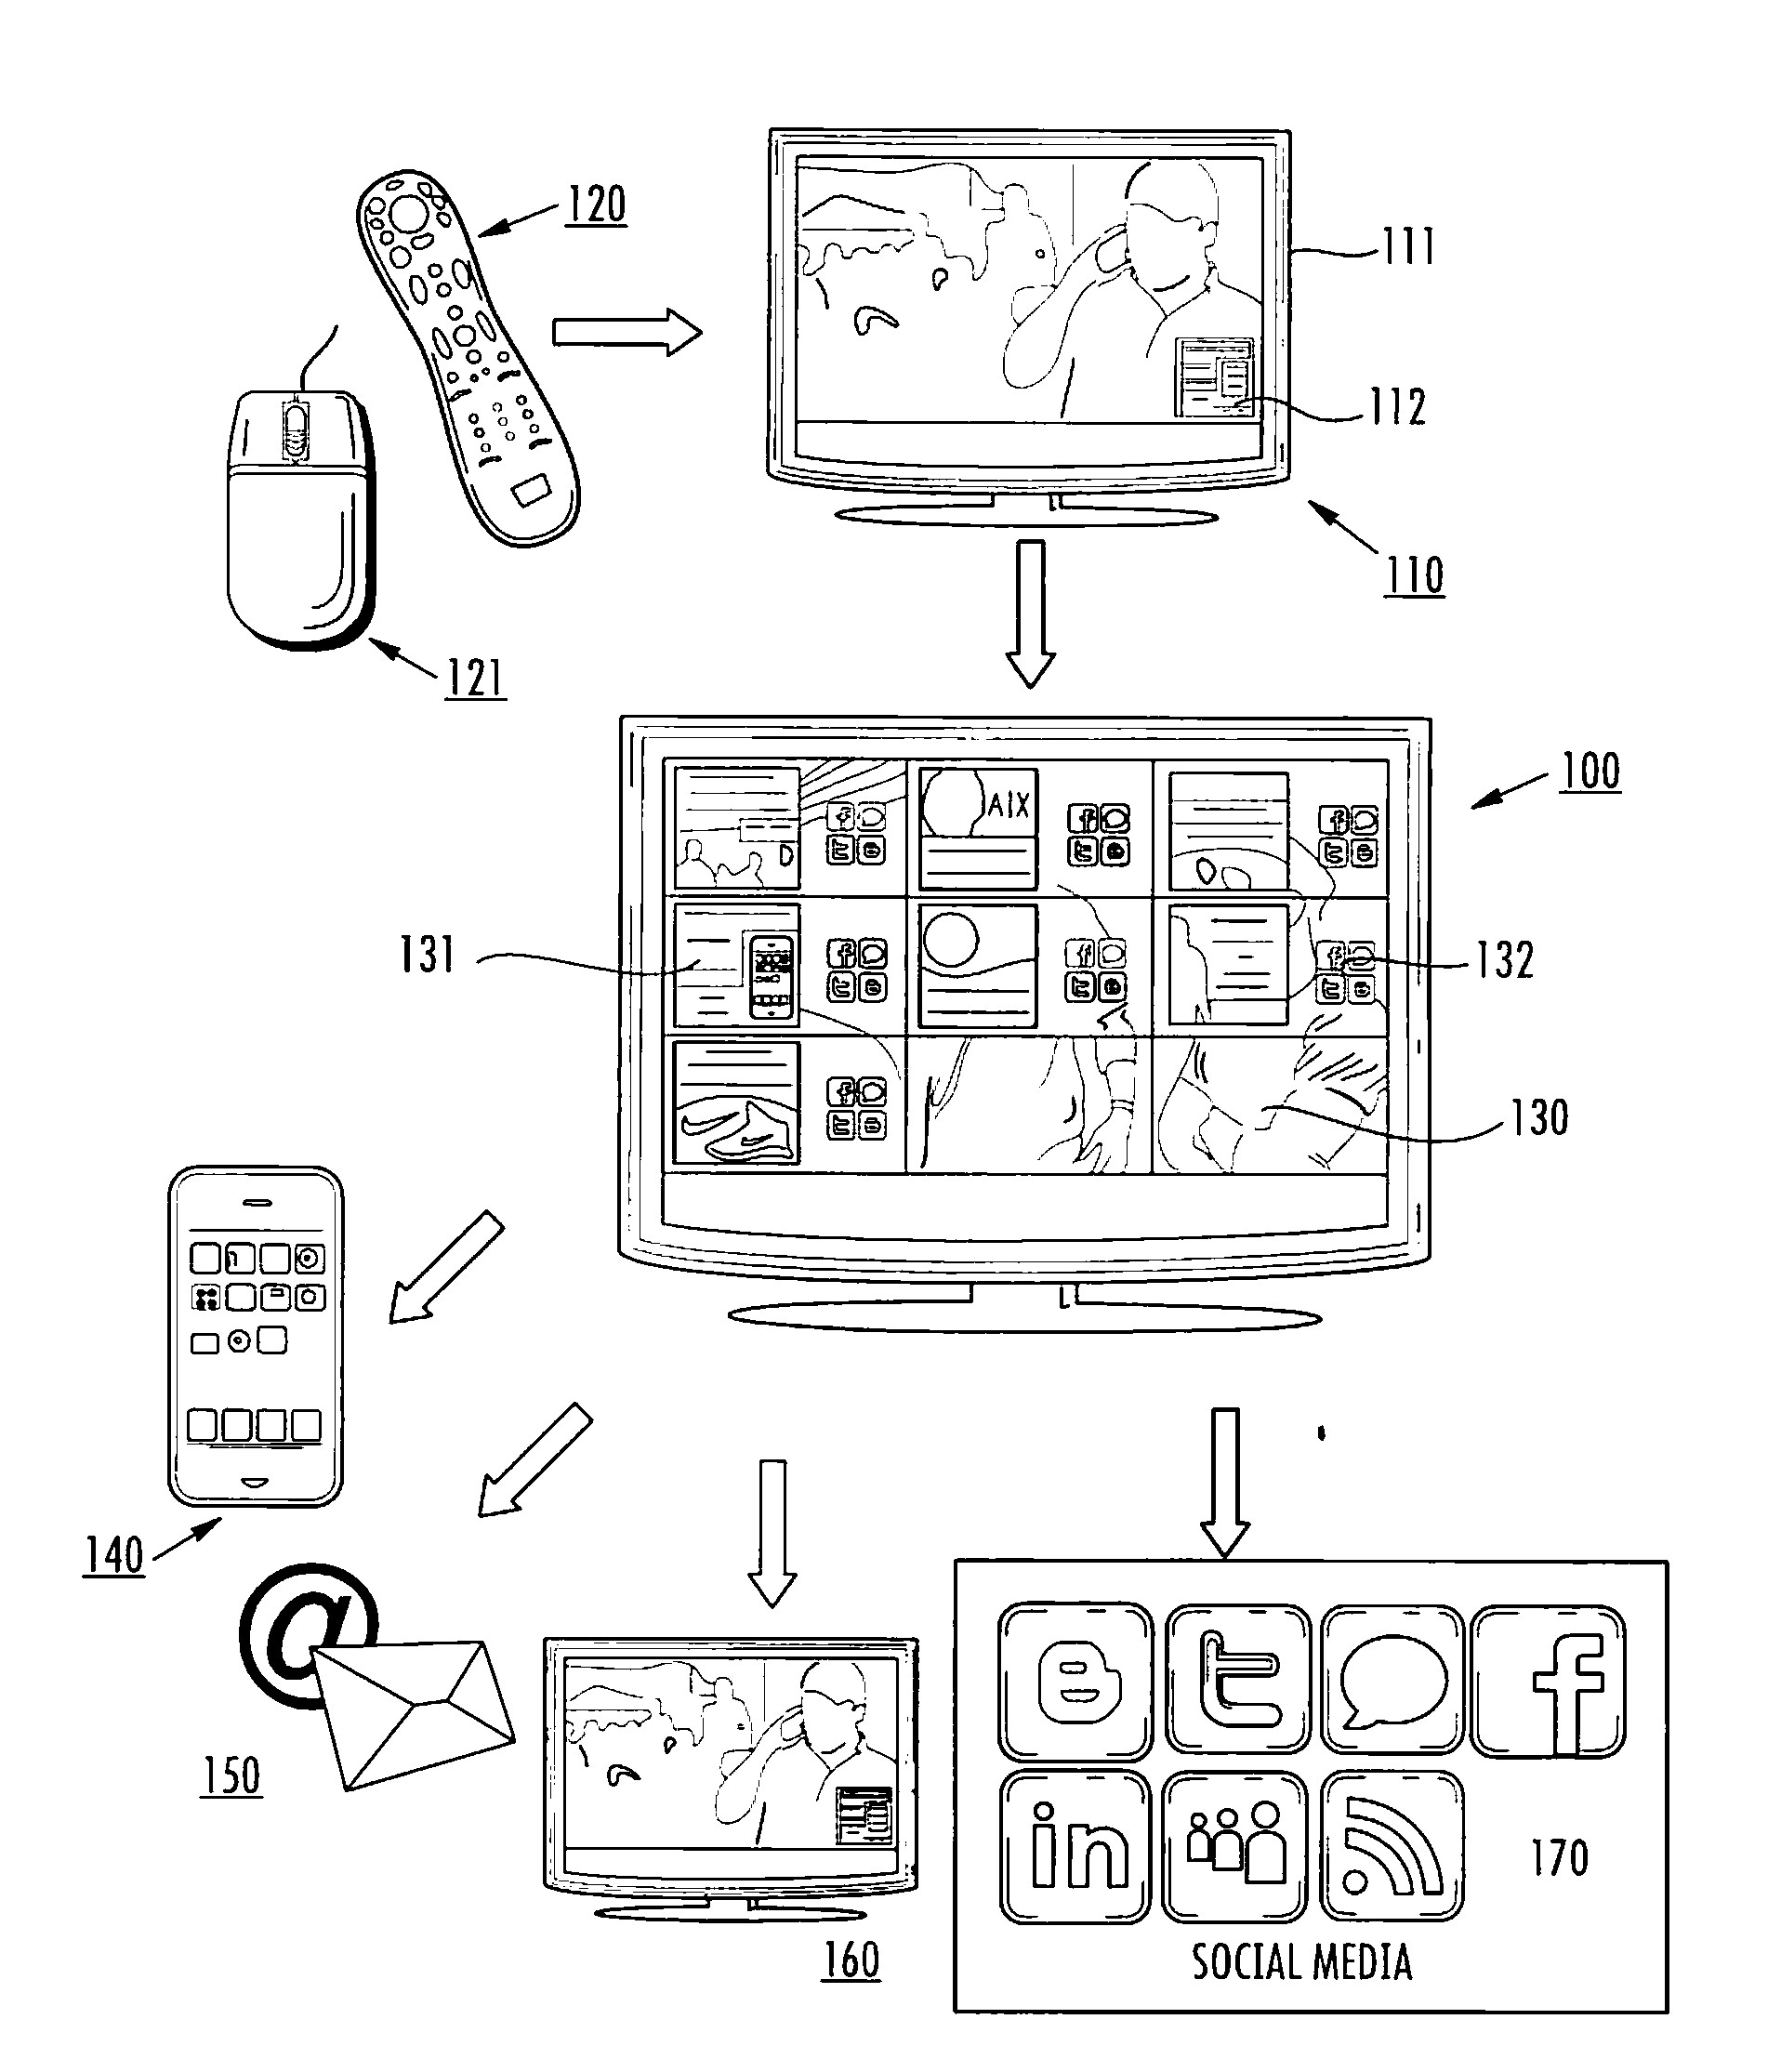 System and Method for Integrating E-Commerce Into Real Time Video Content Advertising